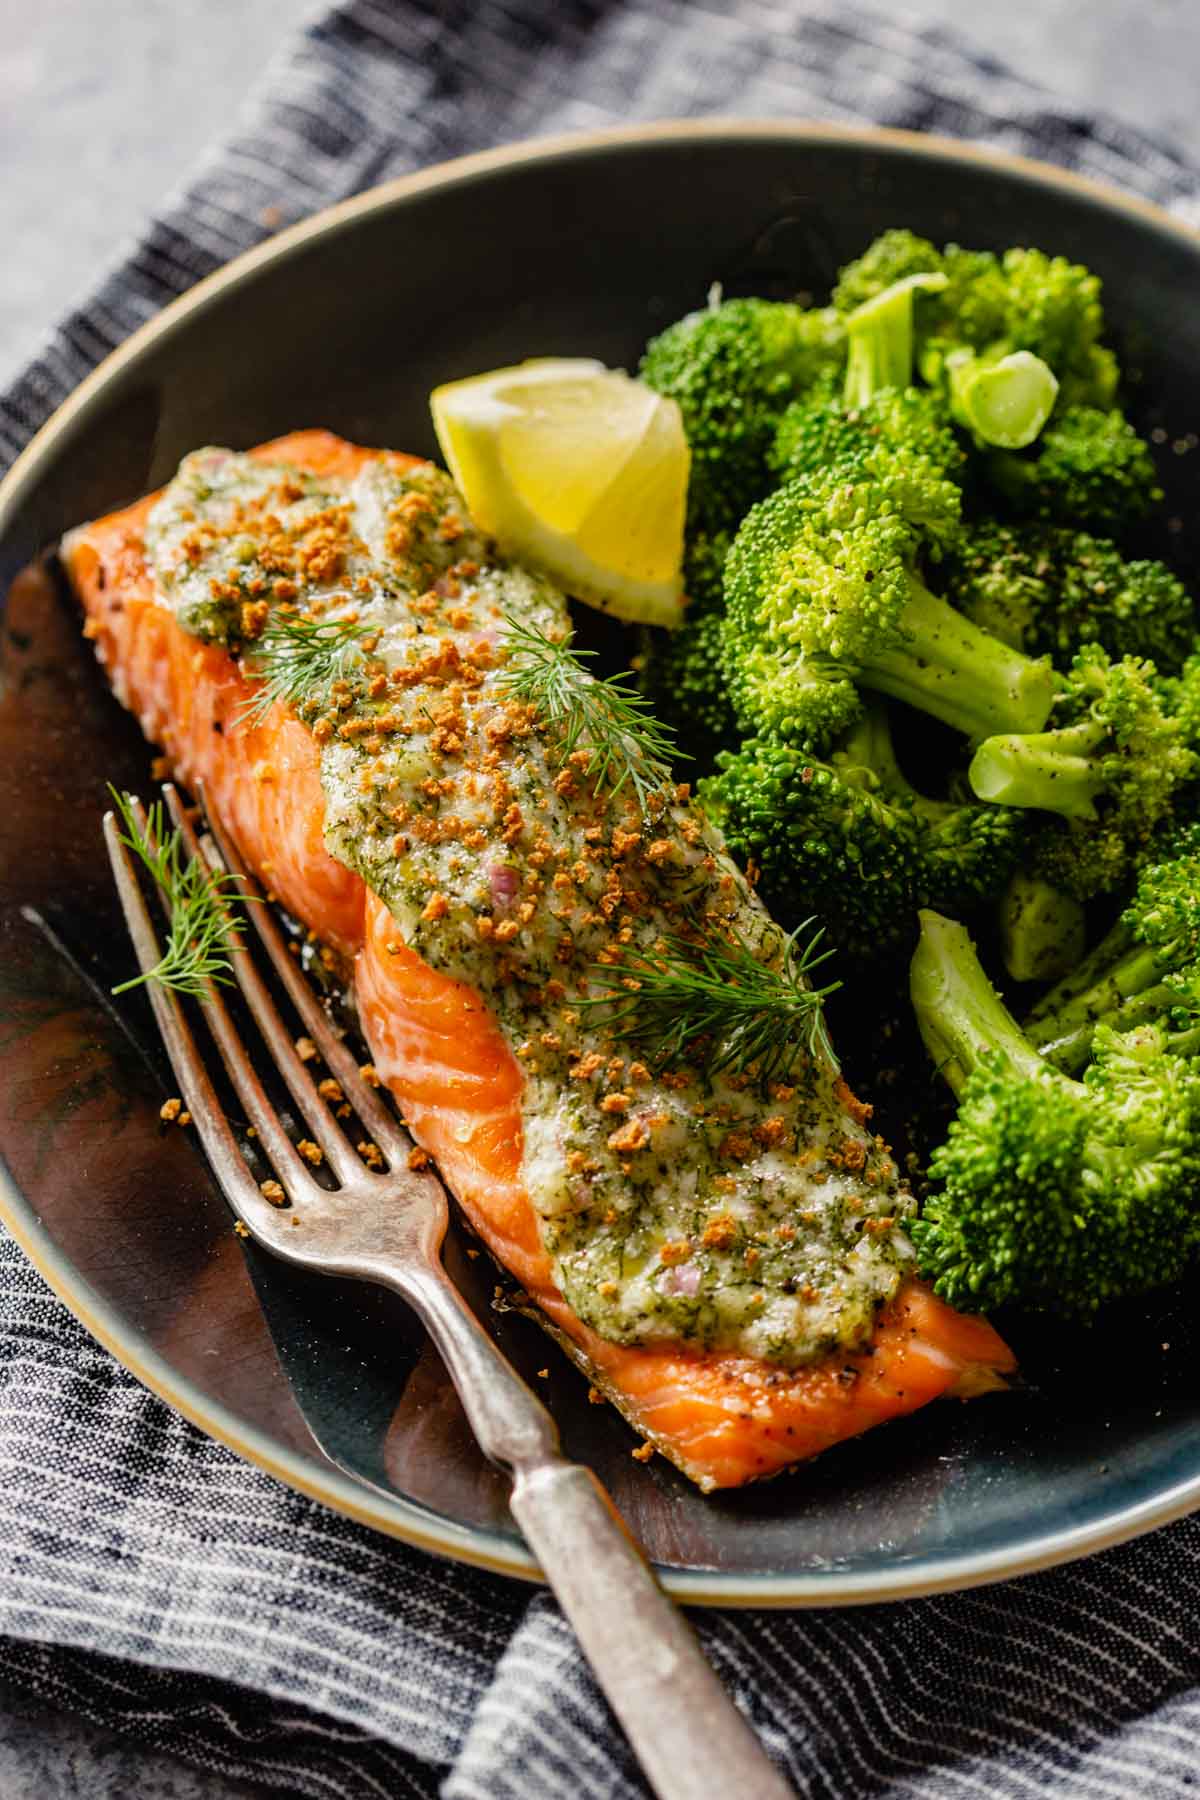 Salmon filet topped with creamy herb sauce set on a plate with broccoli, lemon wedge and a fork.